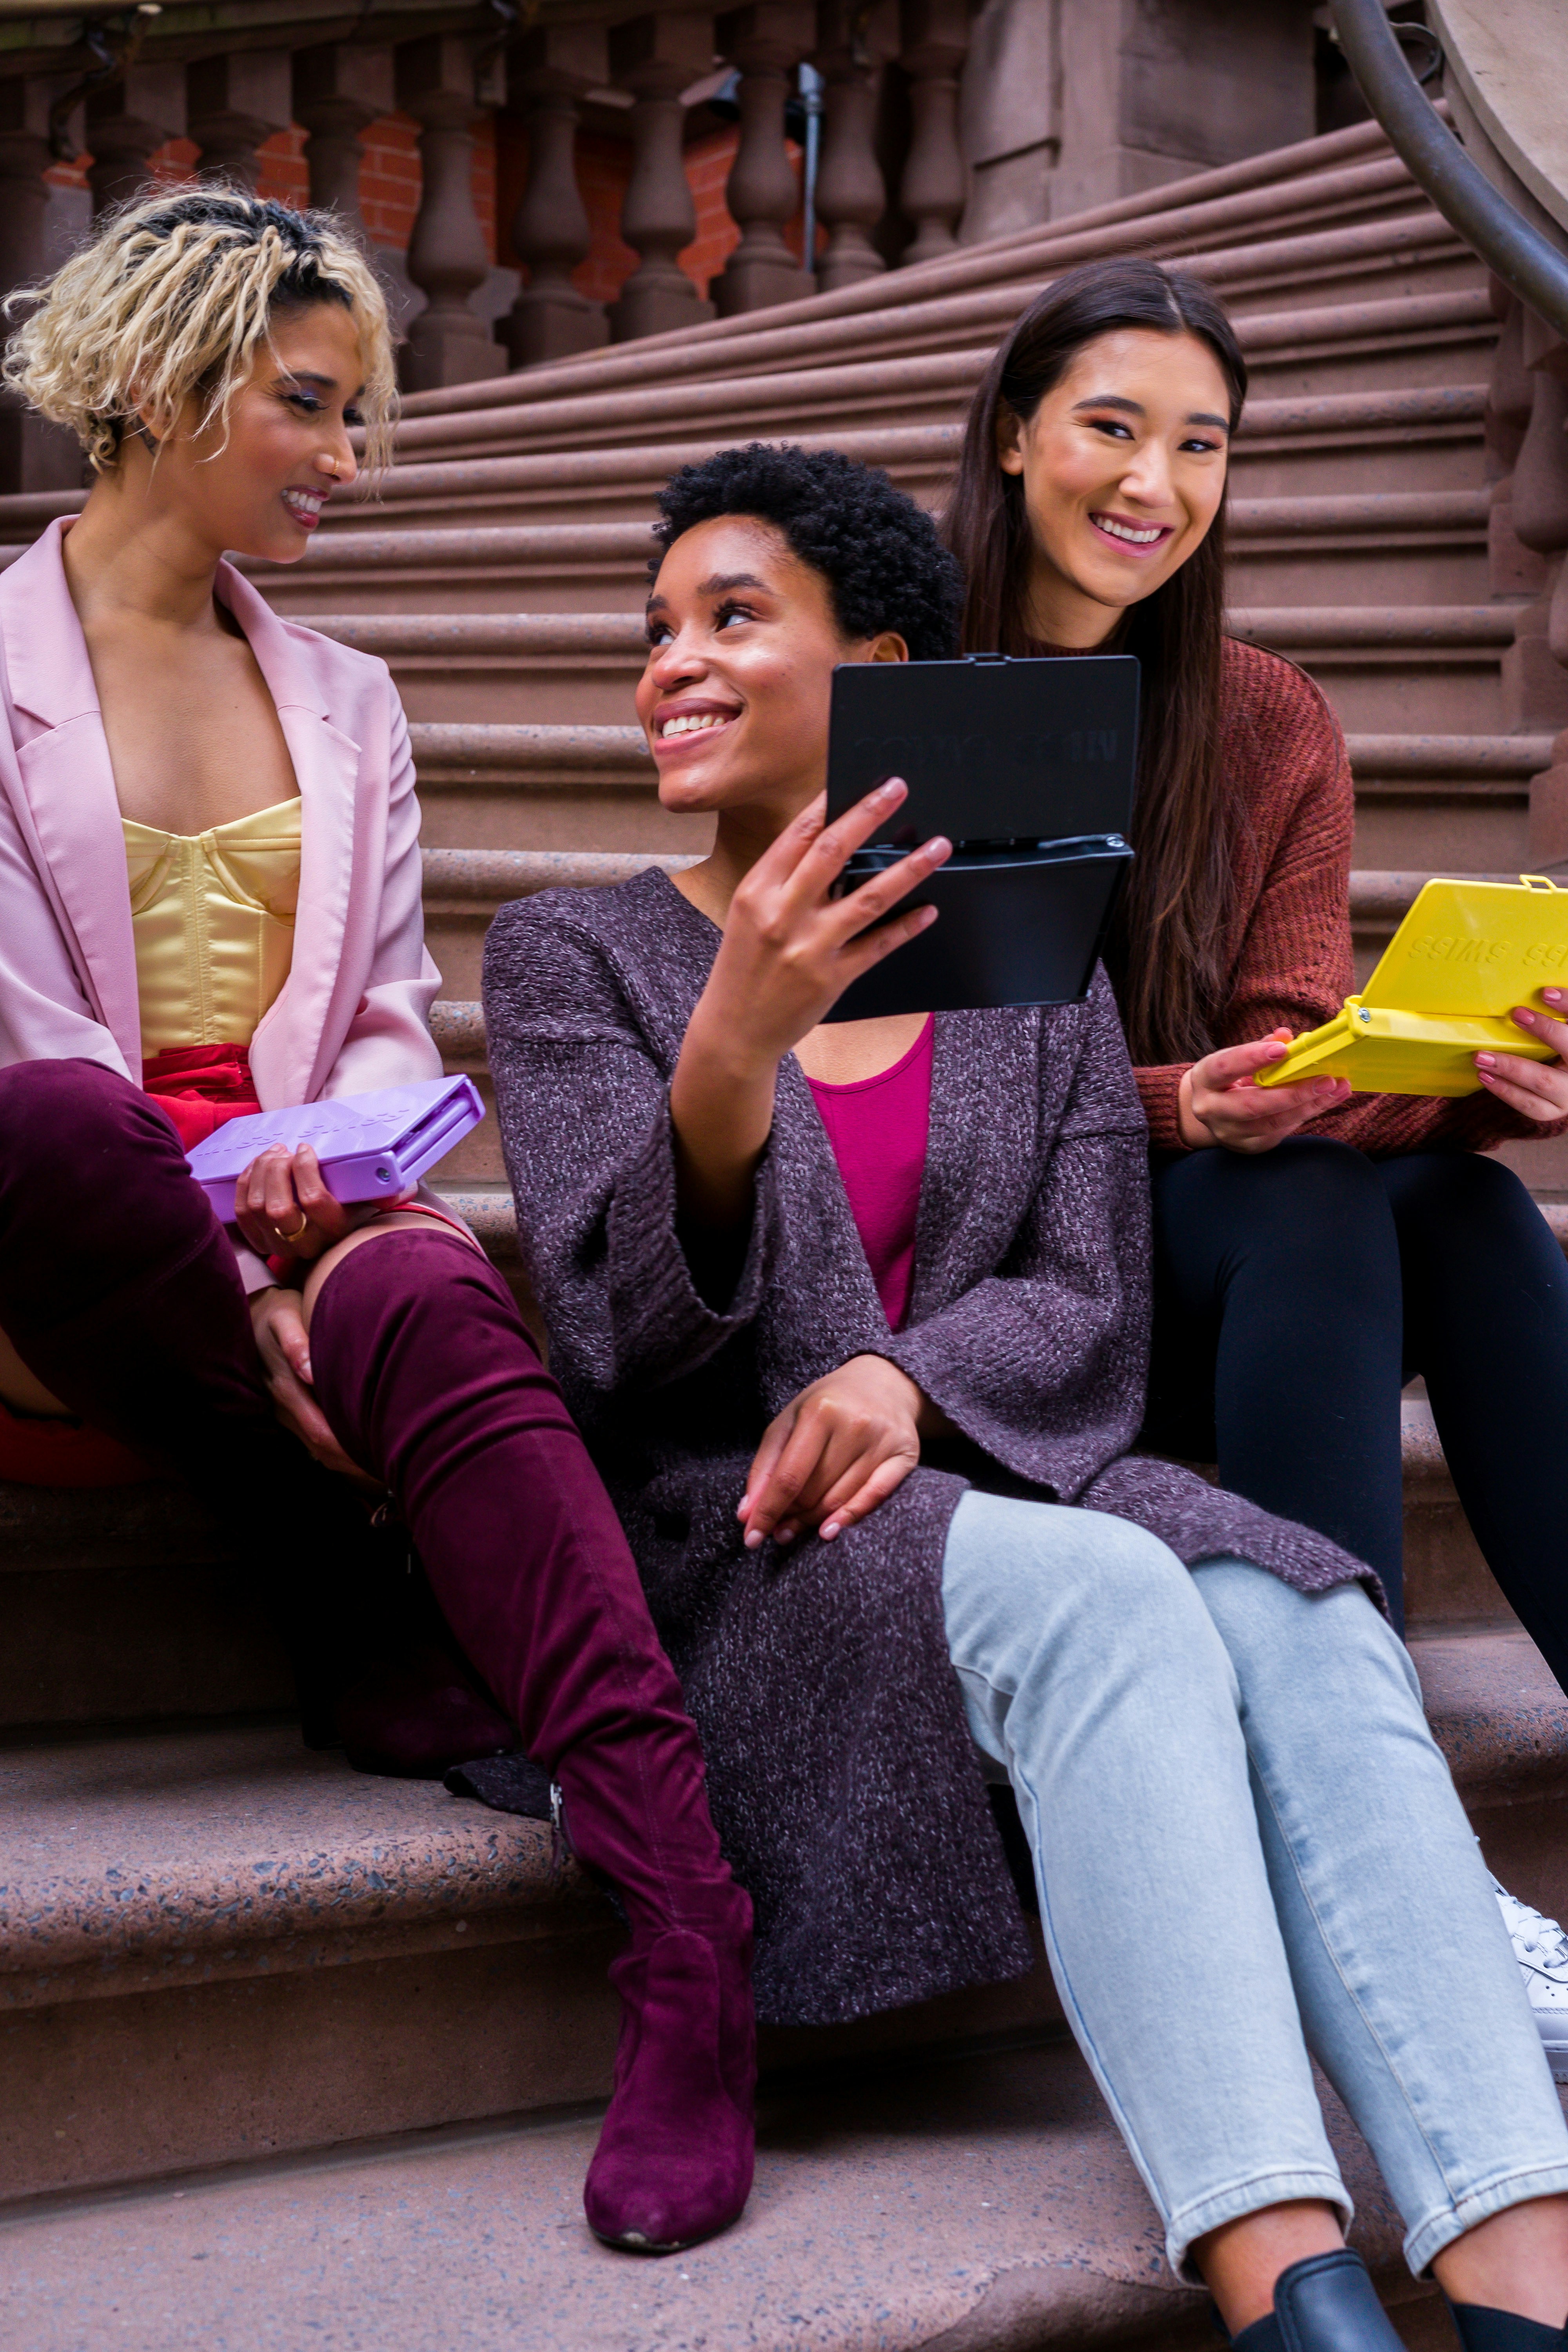 3 women sitting on steps having a discussion about items on their devices.